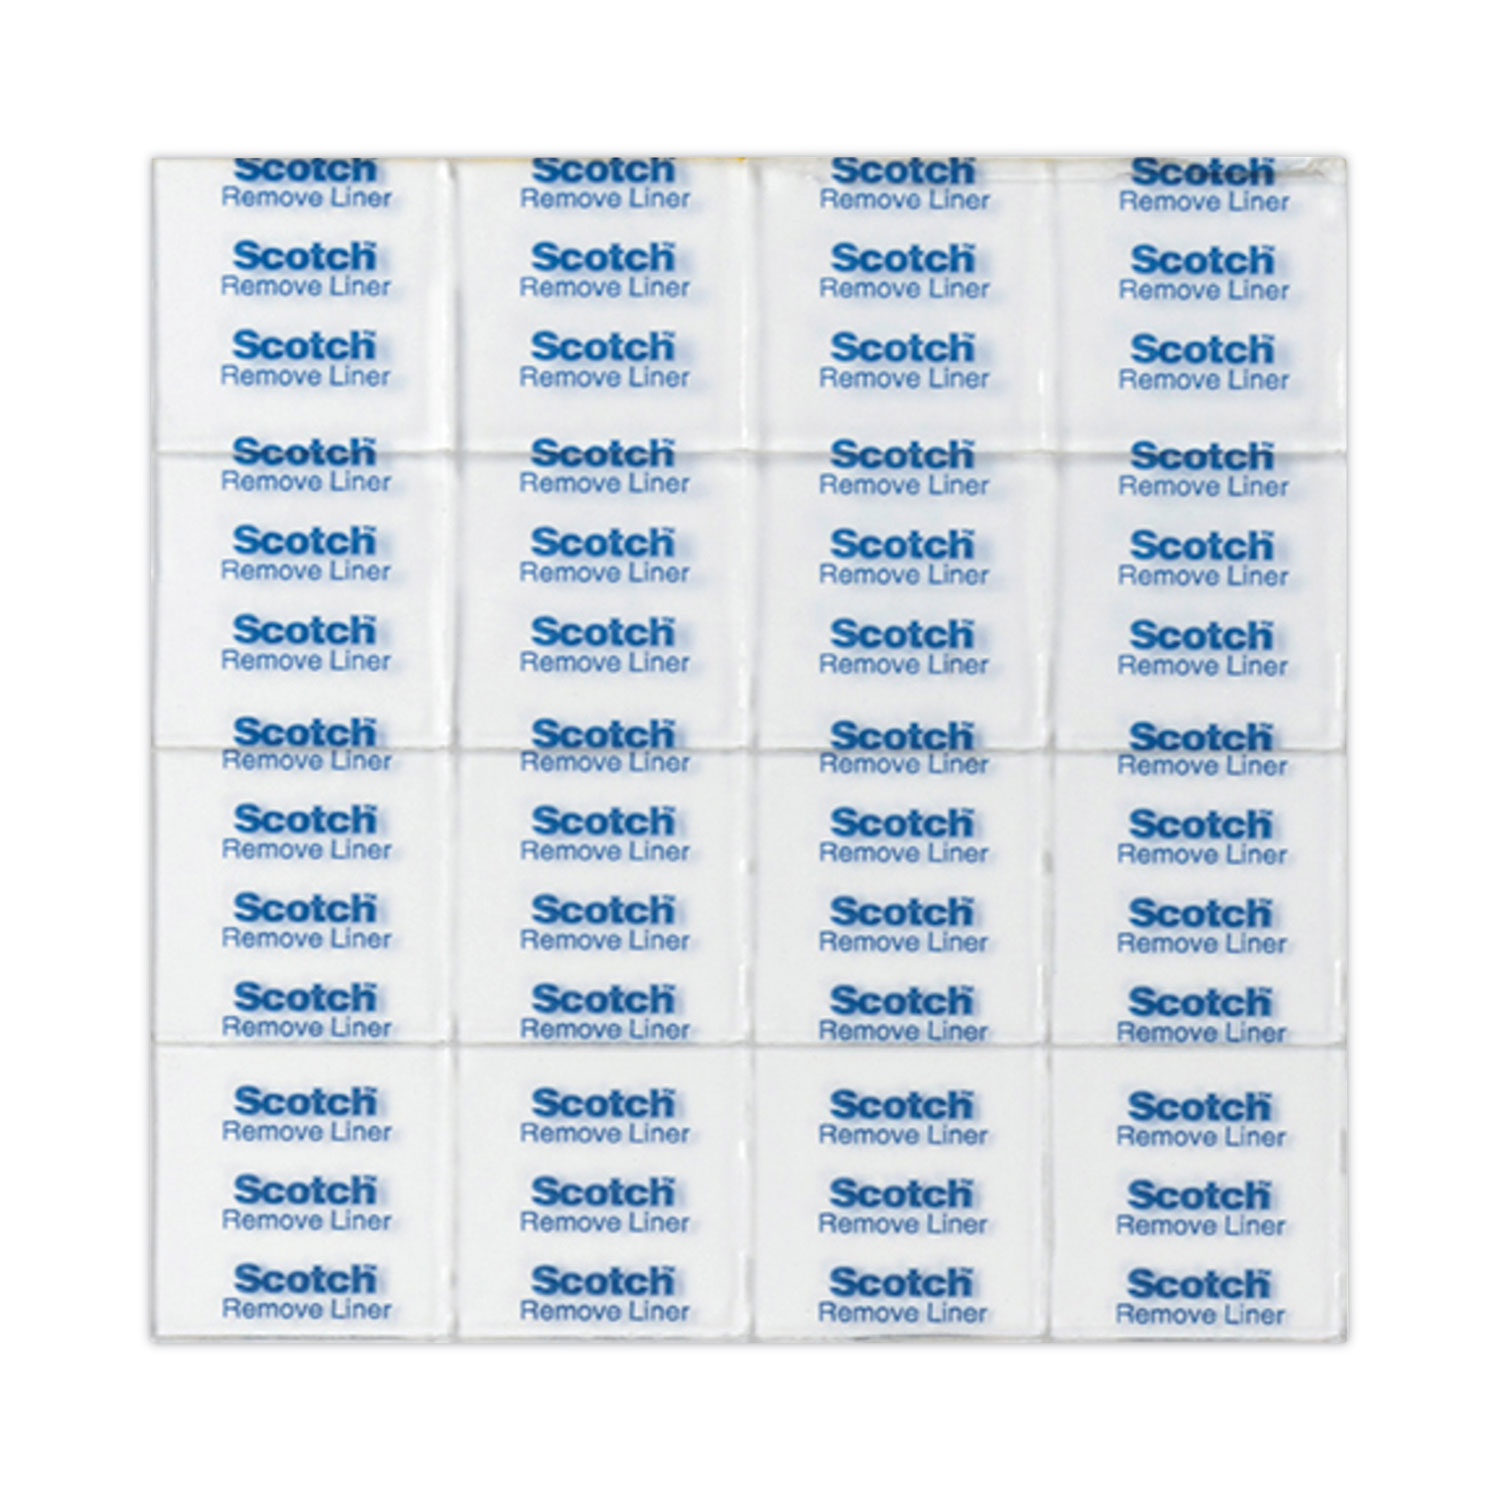 3M 859 Scotch Clear Removable Mounting Squares 11/16-inch 35pk - Meininger  Art Supply